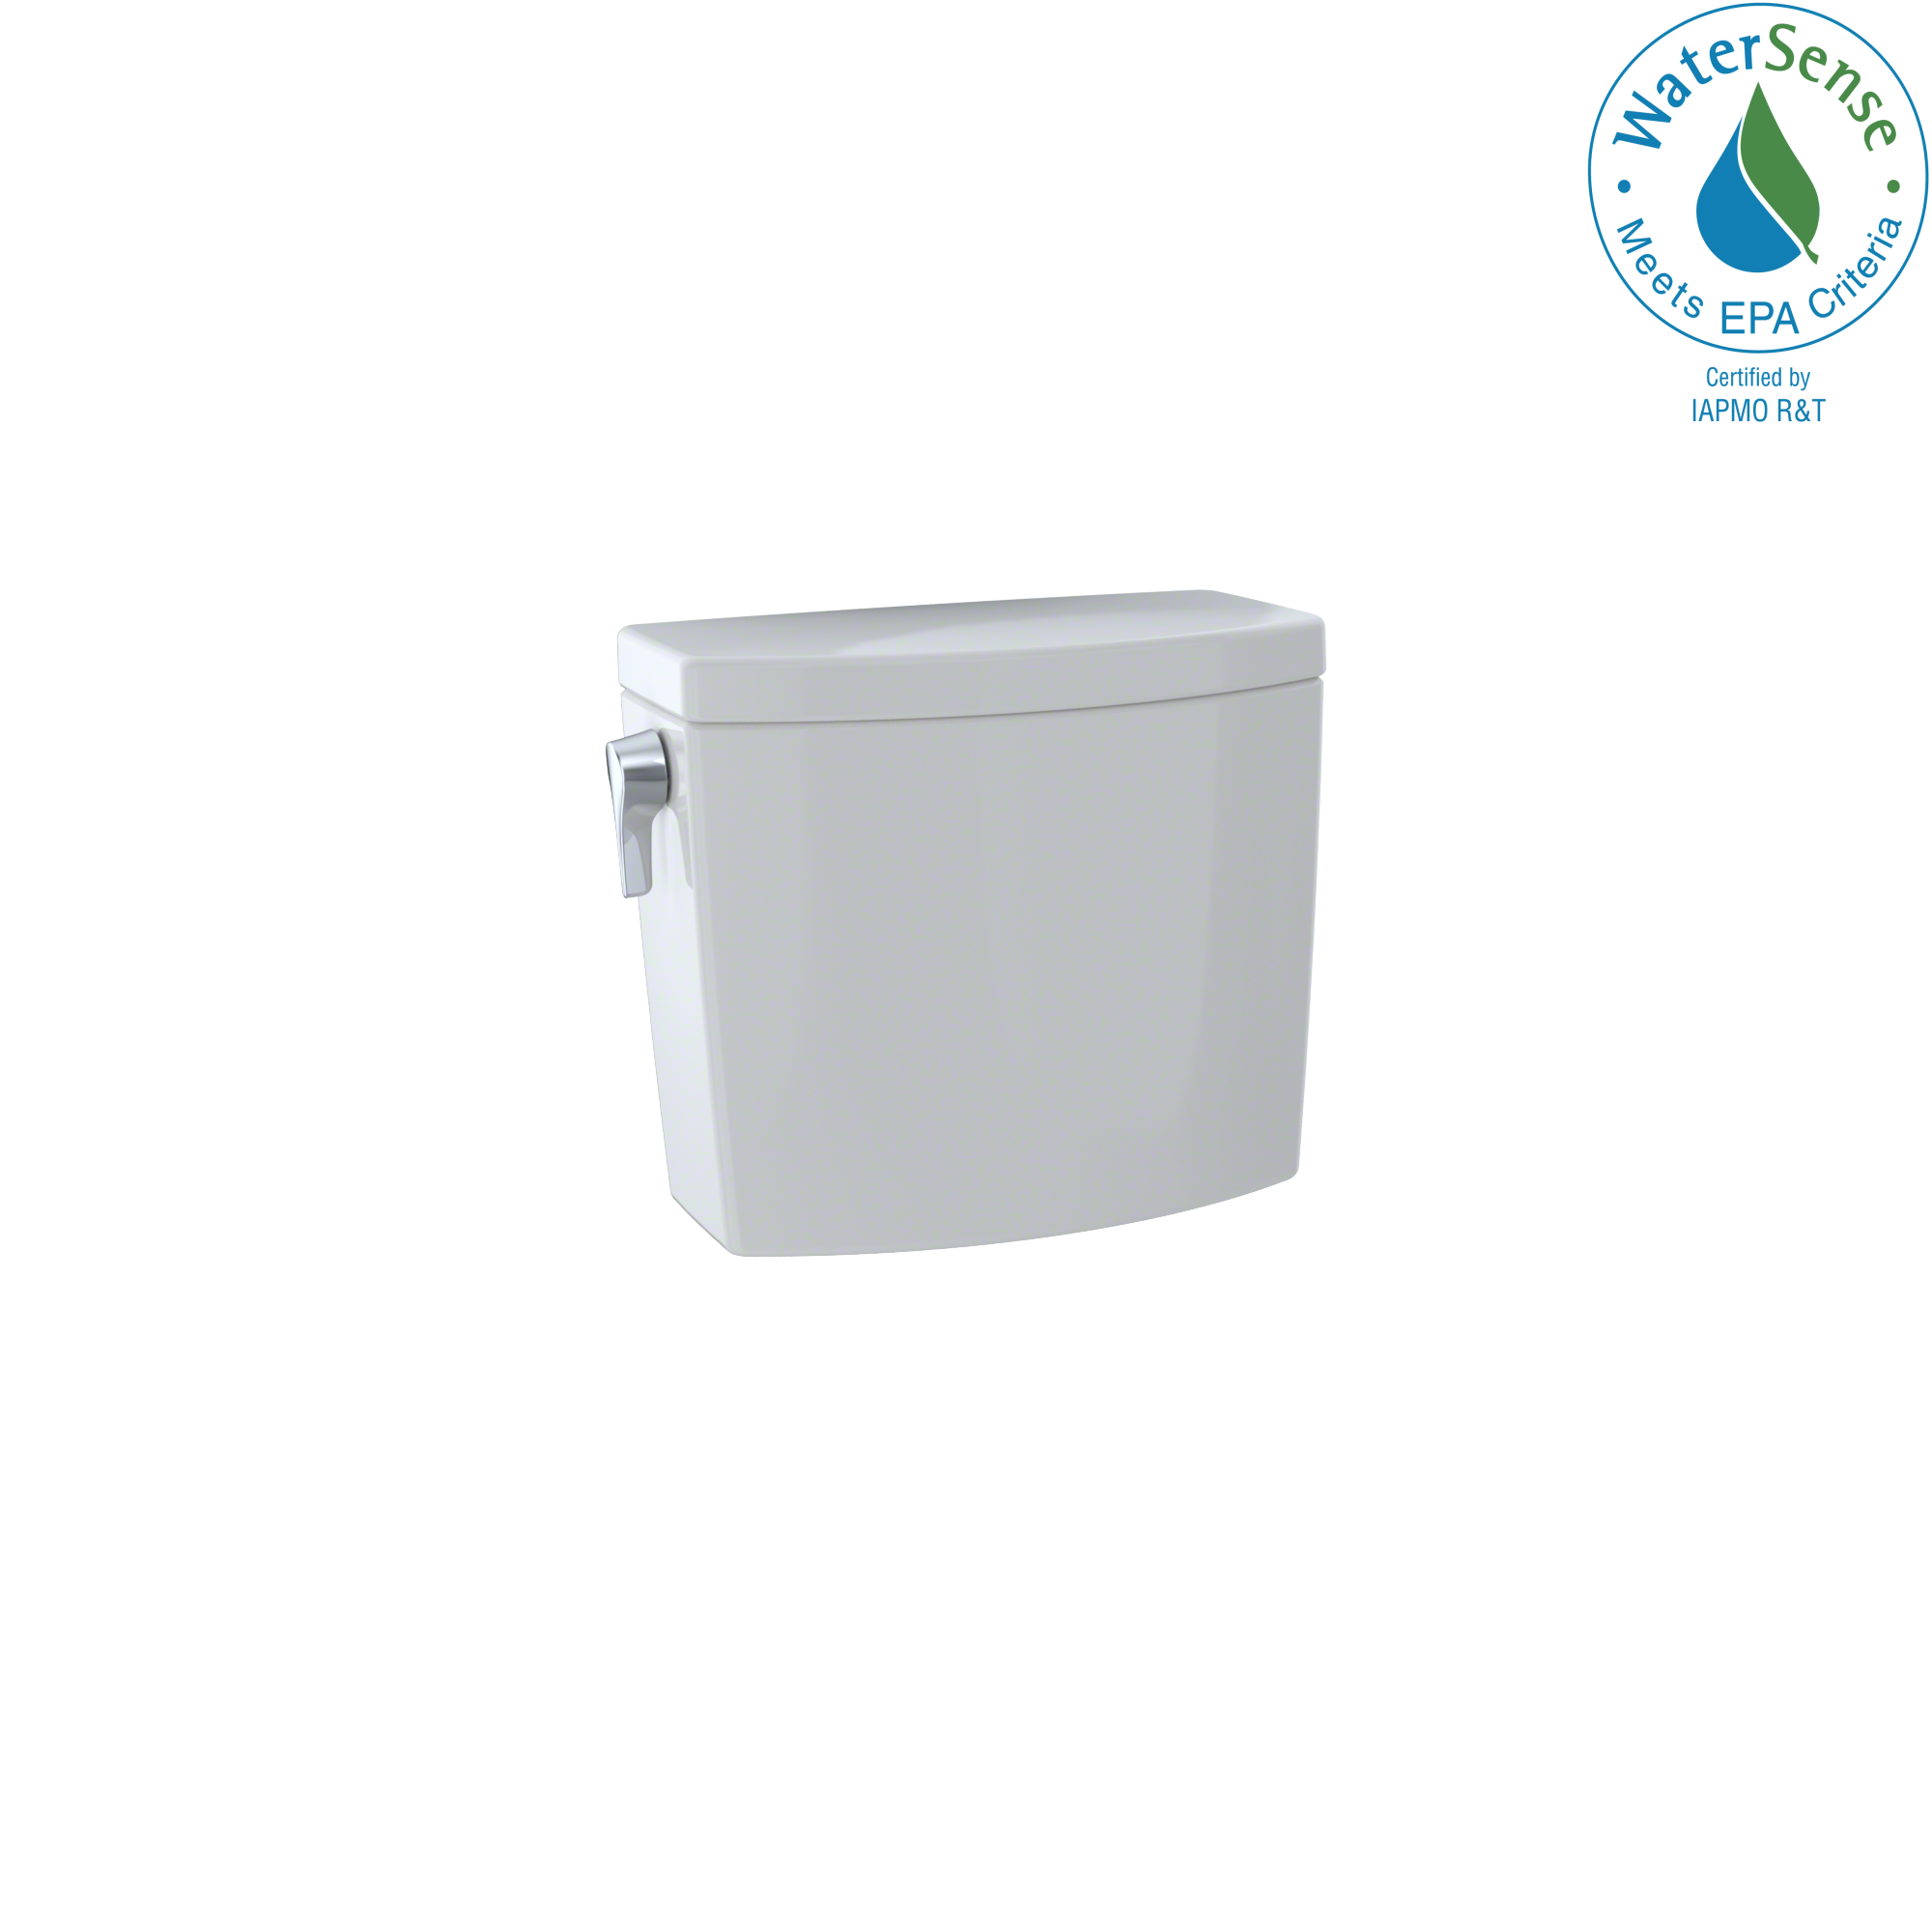 TOTO, TOTO Drake II 1G and Vespin II 1G, 1.0 GPF Toilet Tank, Colonial White ST453U#11